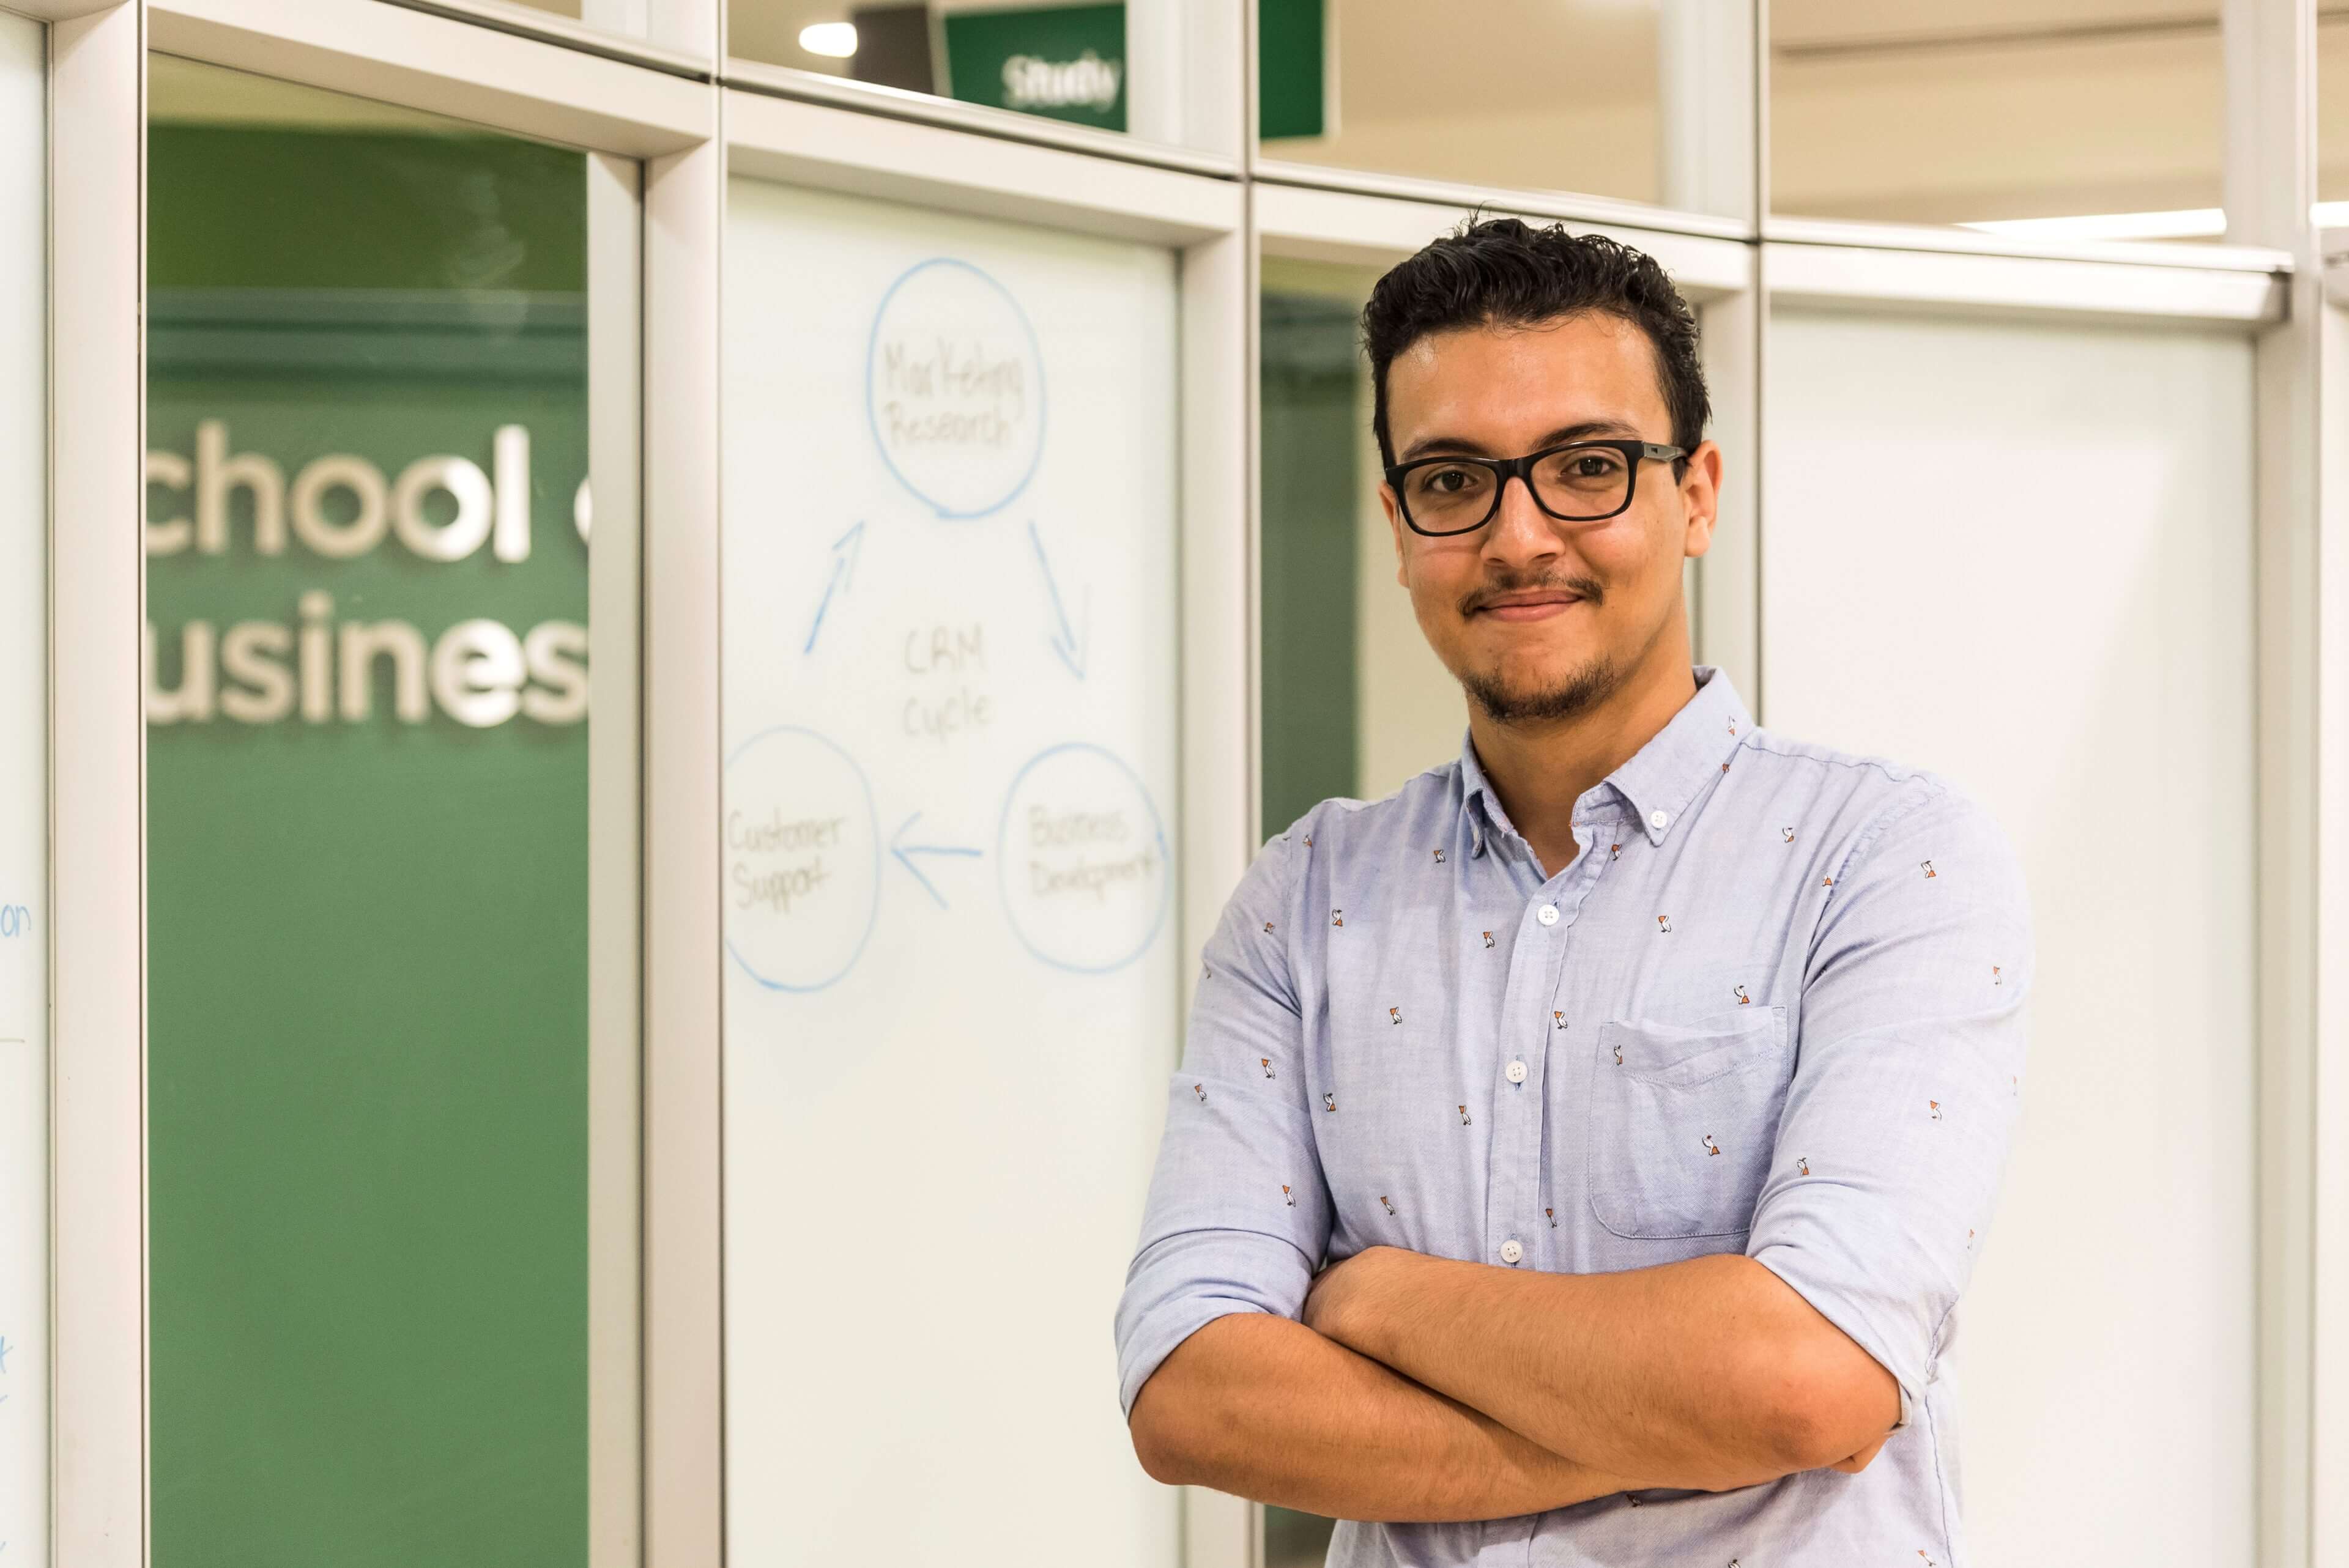 Male student with glasses and crossed arms standing in front of a whiteboard in a School of Business and Hospitality study space with School sign in the background